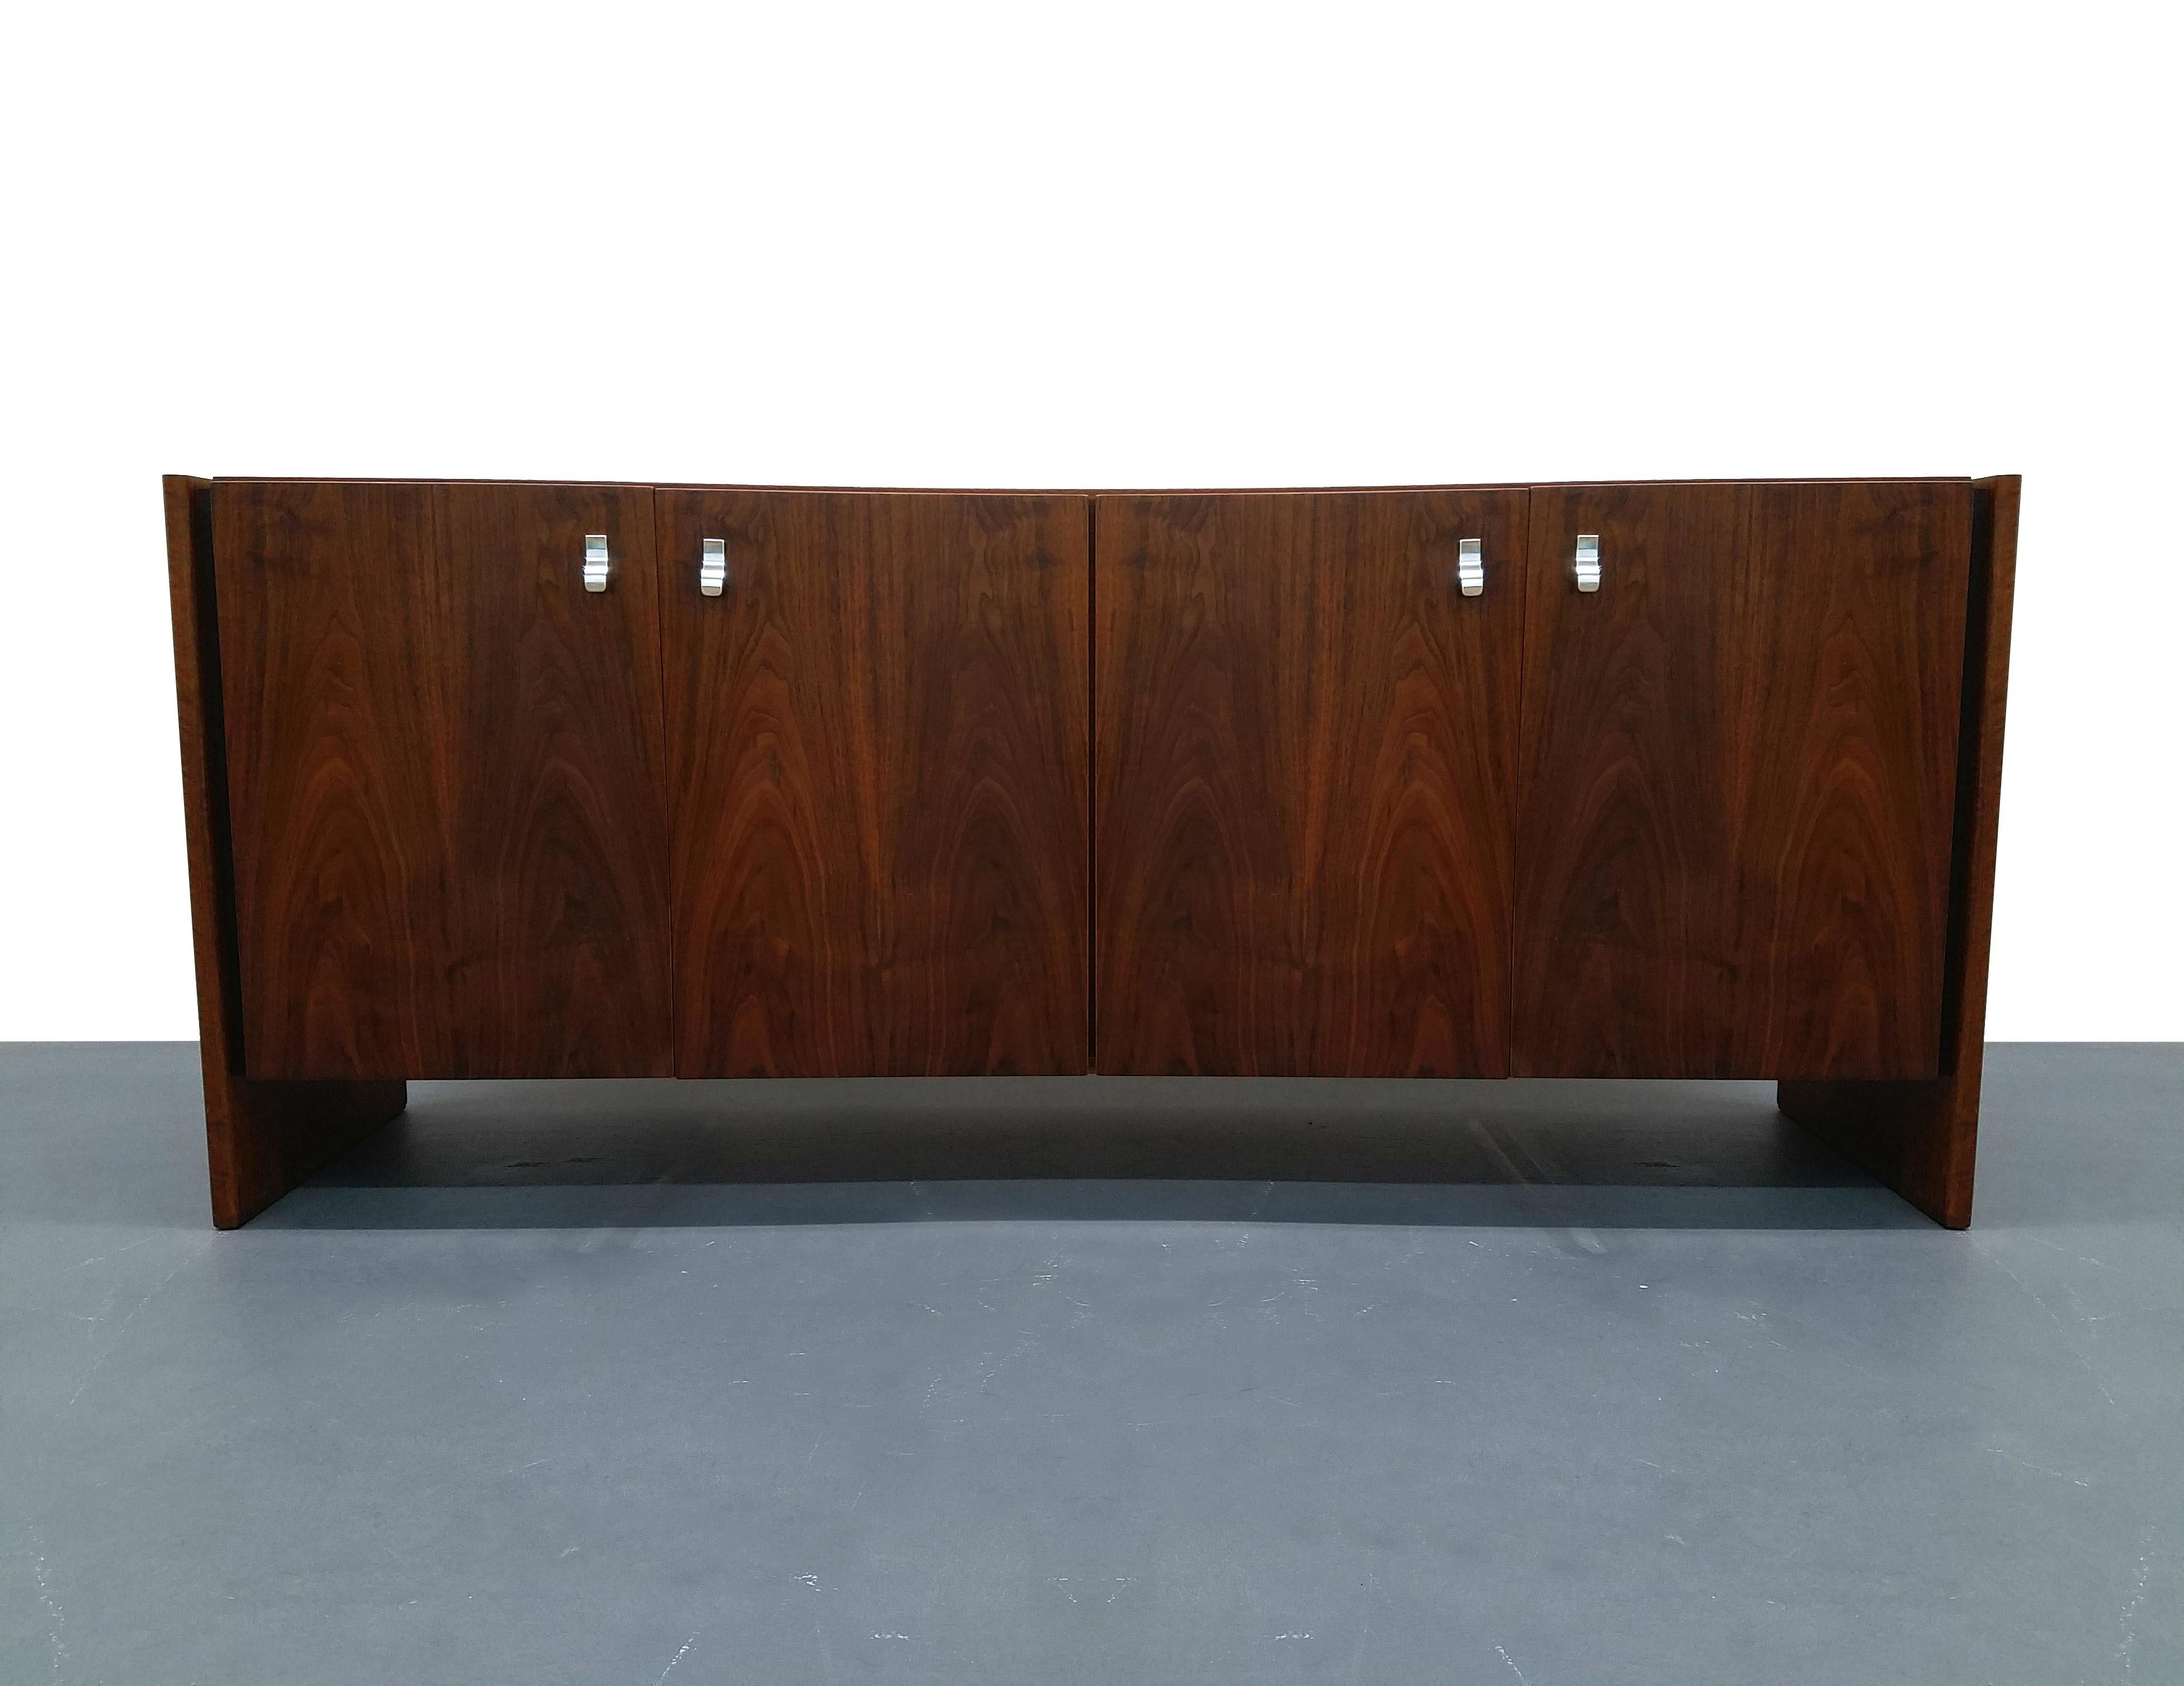 Beautiful midcentury walnut credenza, with stunning grain, large chrome handles and rounded edges. A simple, vintage piece with modern appeal.

Cabinet is in excellent condition.